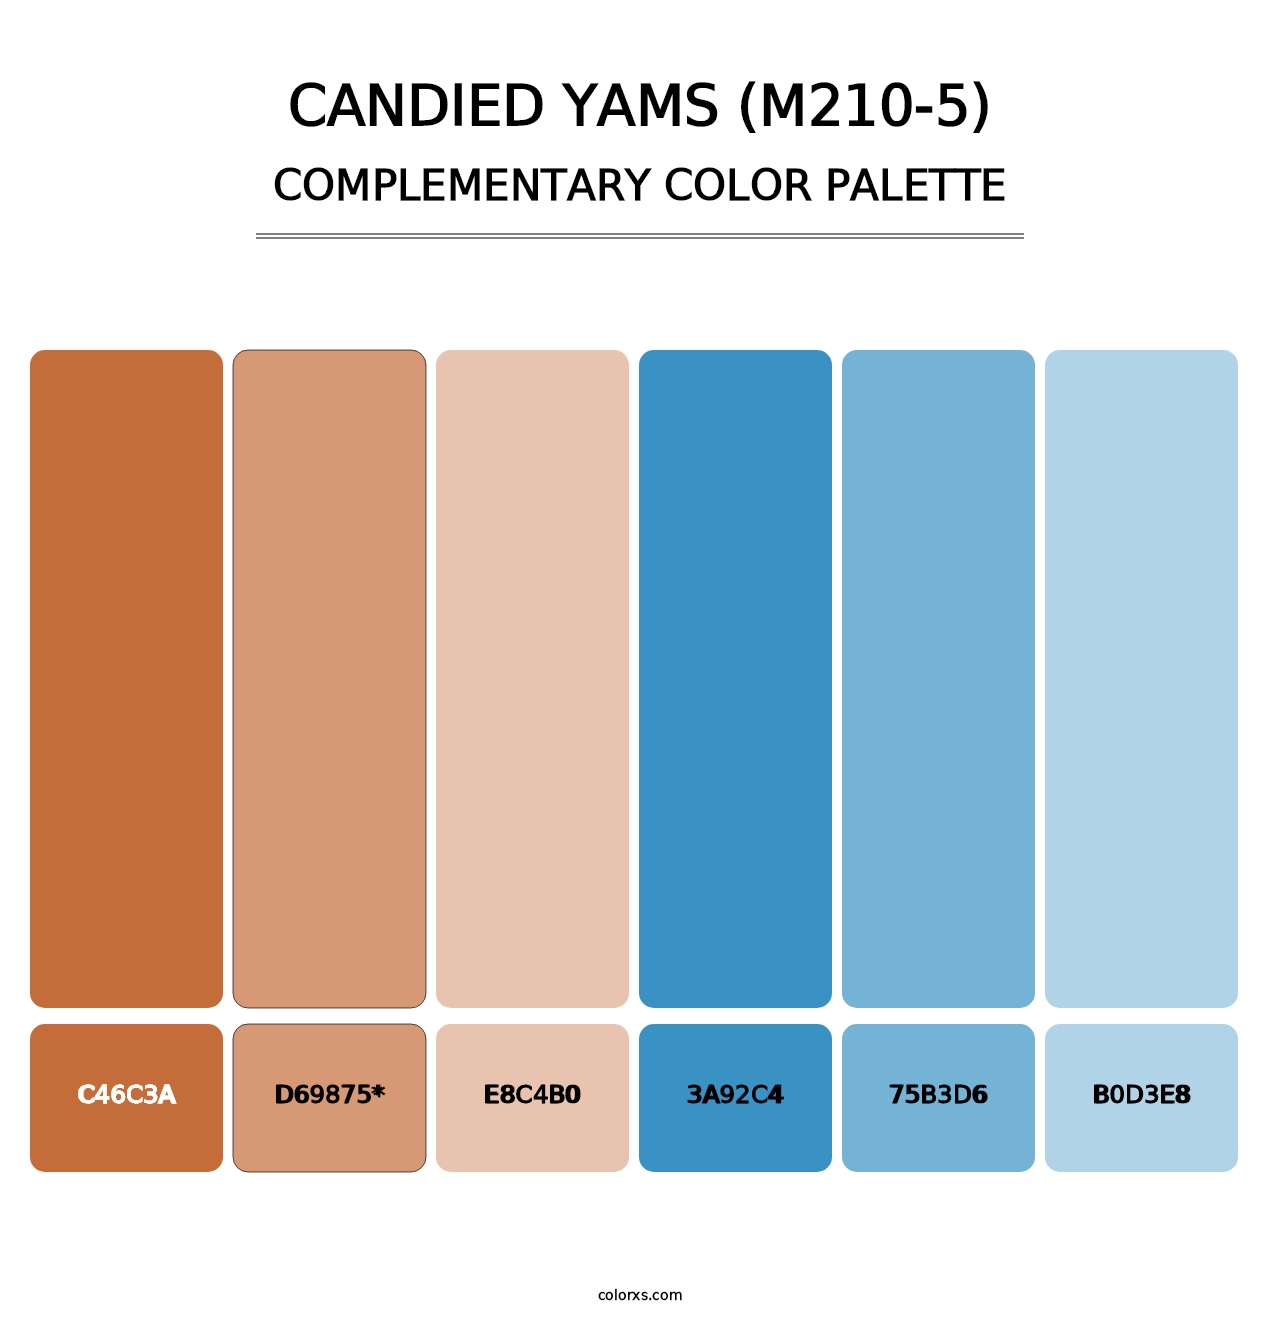 Candied Yams (M210-5) - Complementary Color Palette